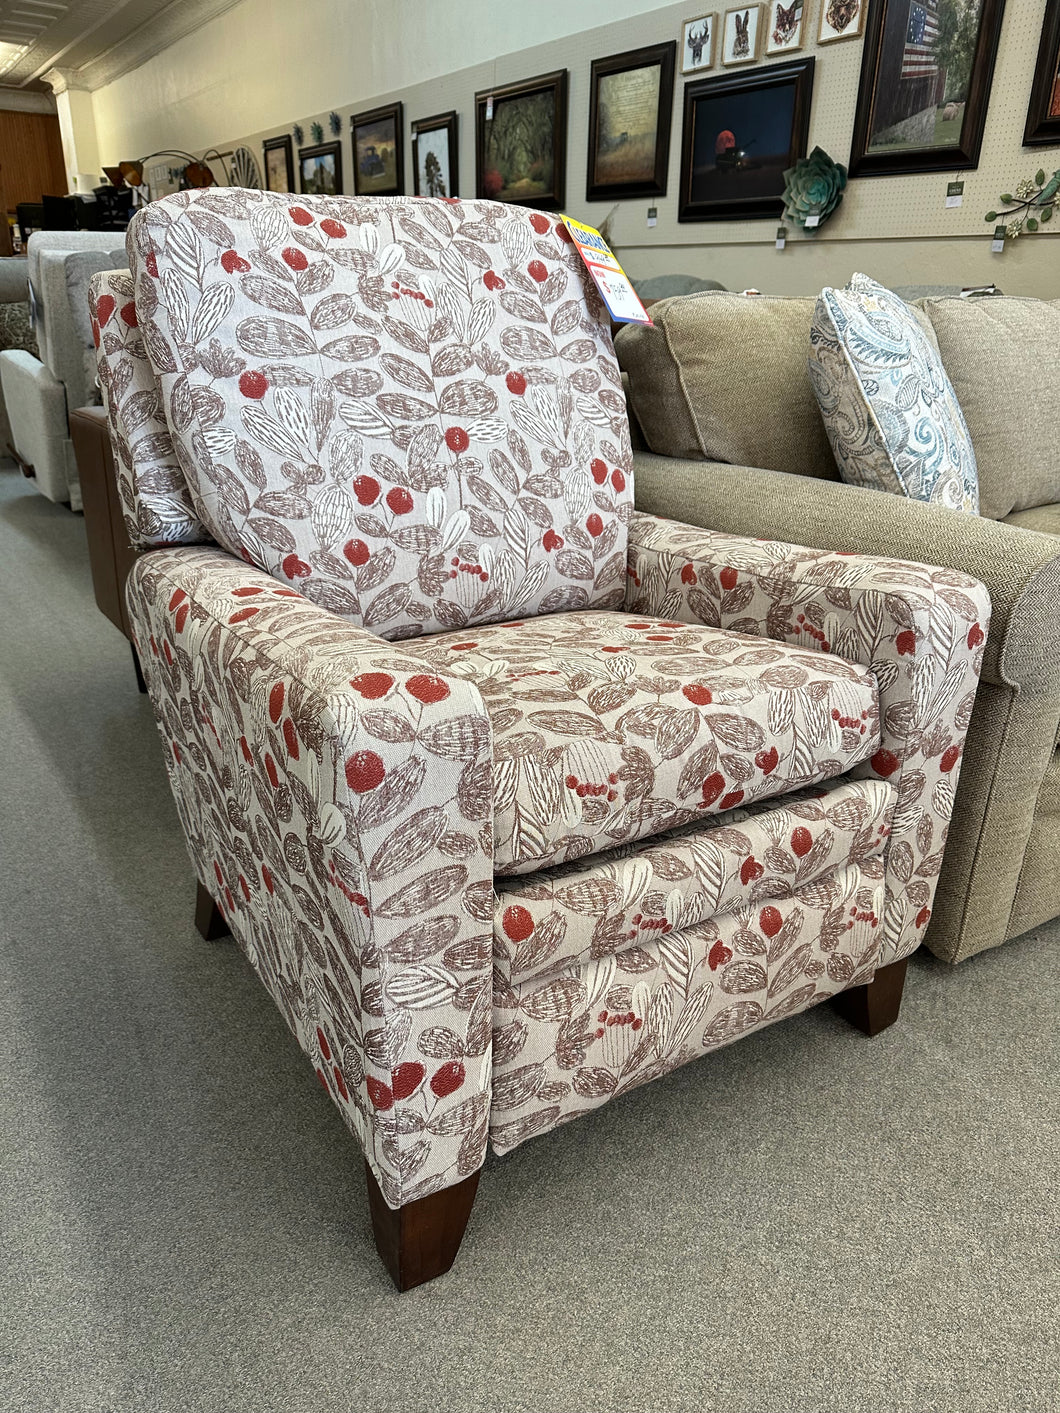 Cabot Low Leg Reclining Chair by La-Z-Boy Furniture 255-439 J168717 Discontinued style 6-27-22